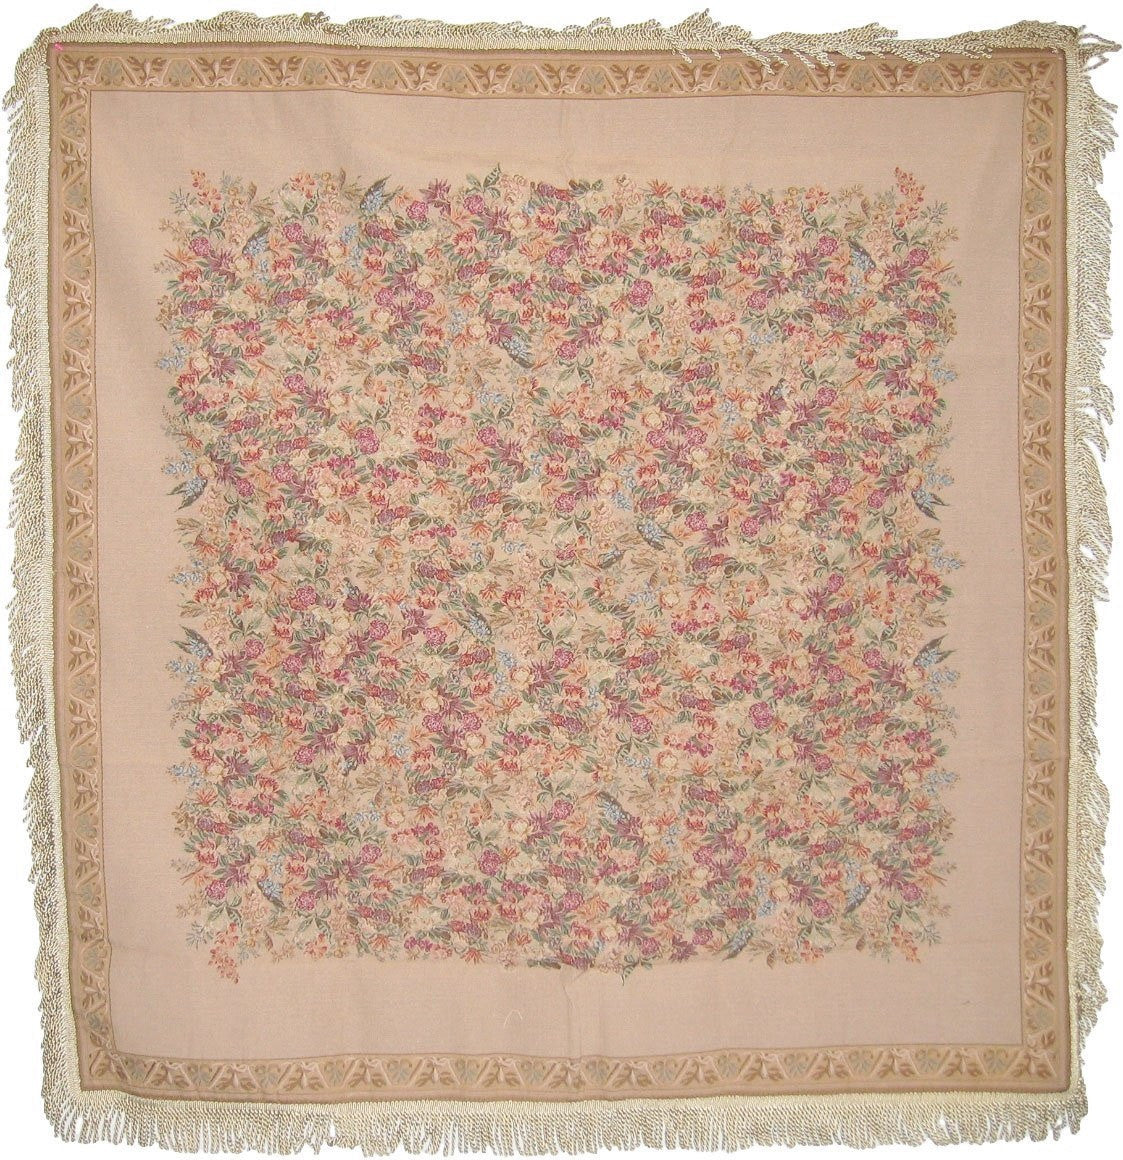 Woven Wildflower Wonderland Floral Beige Tan Square Shaped Tapestry Table Cloths - Stores Basement - Discount Bedding